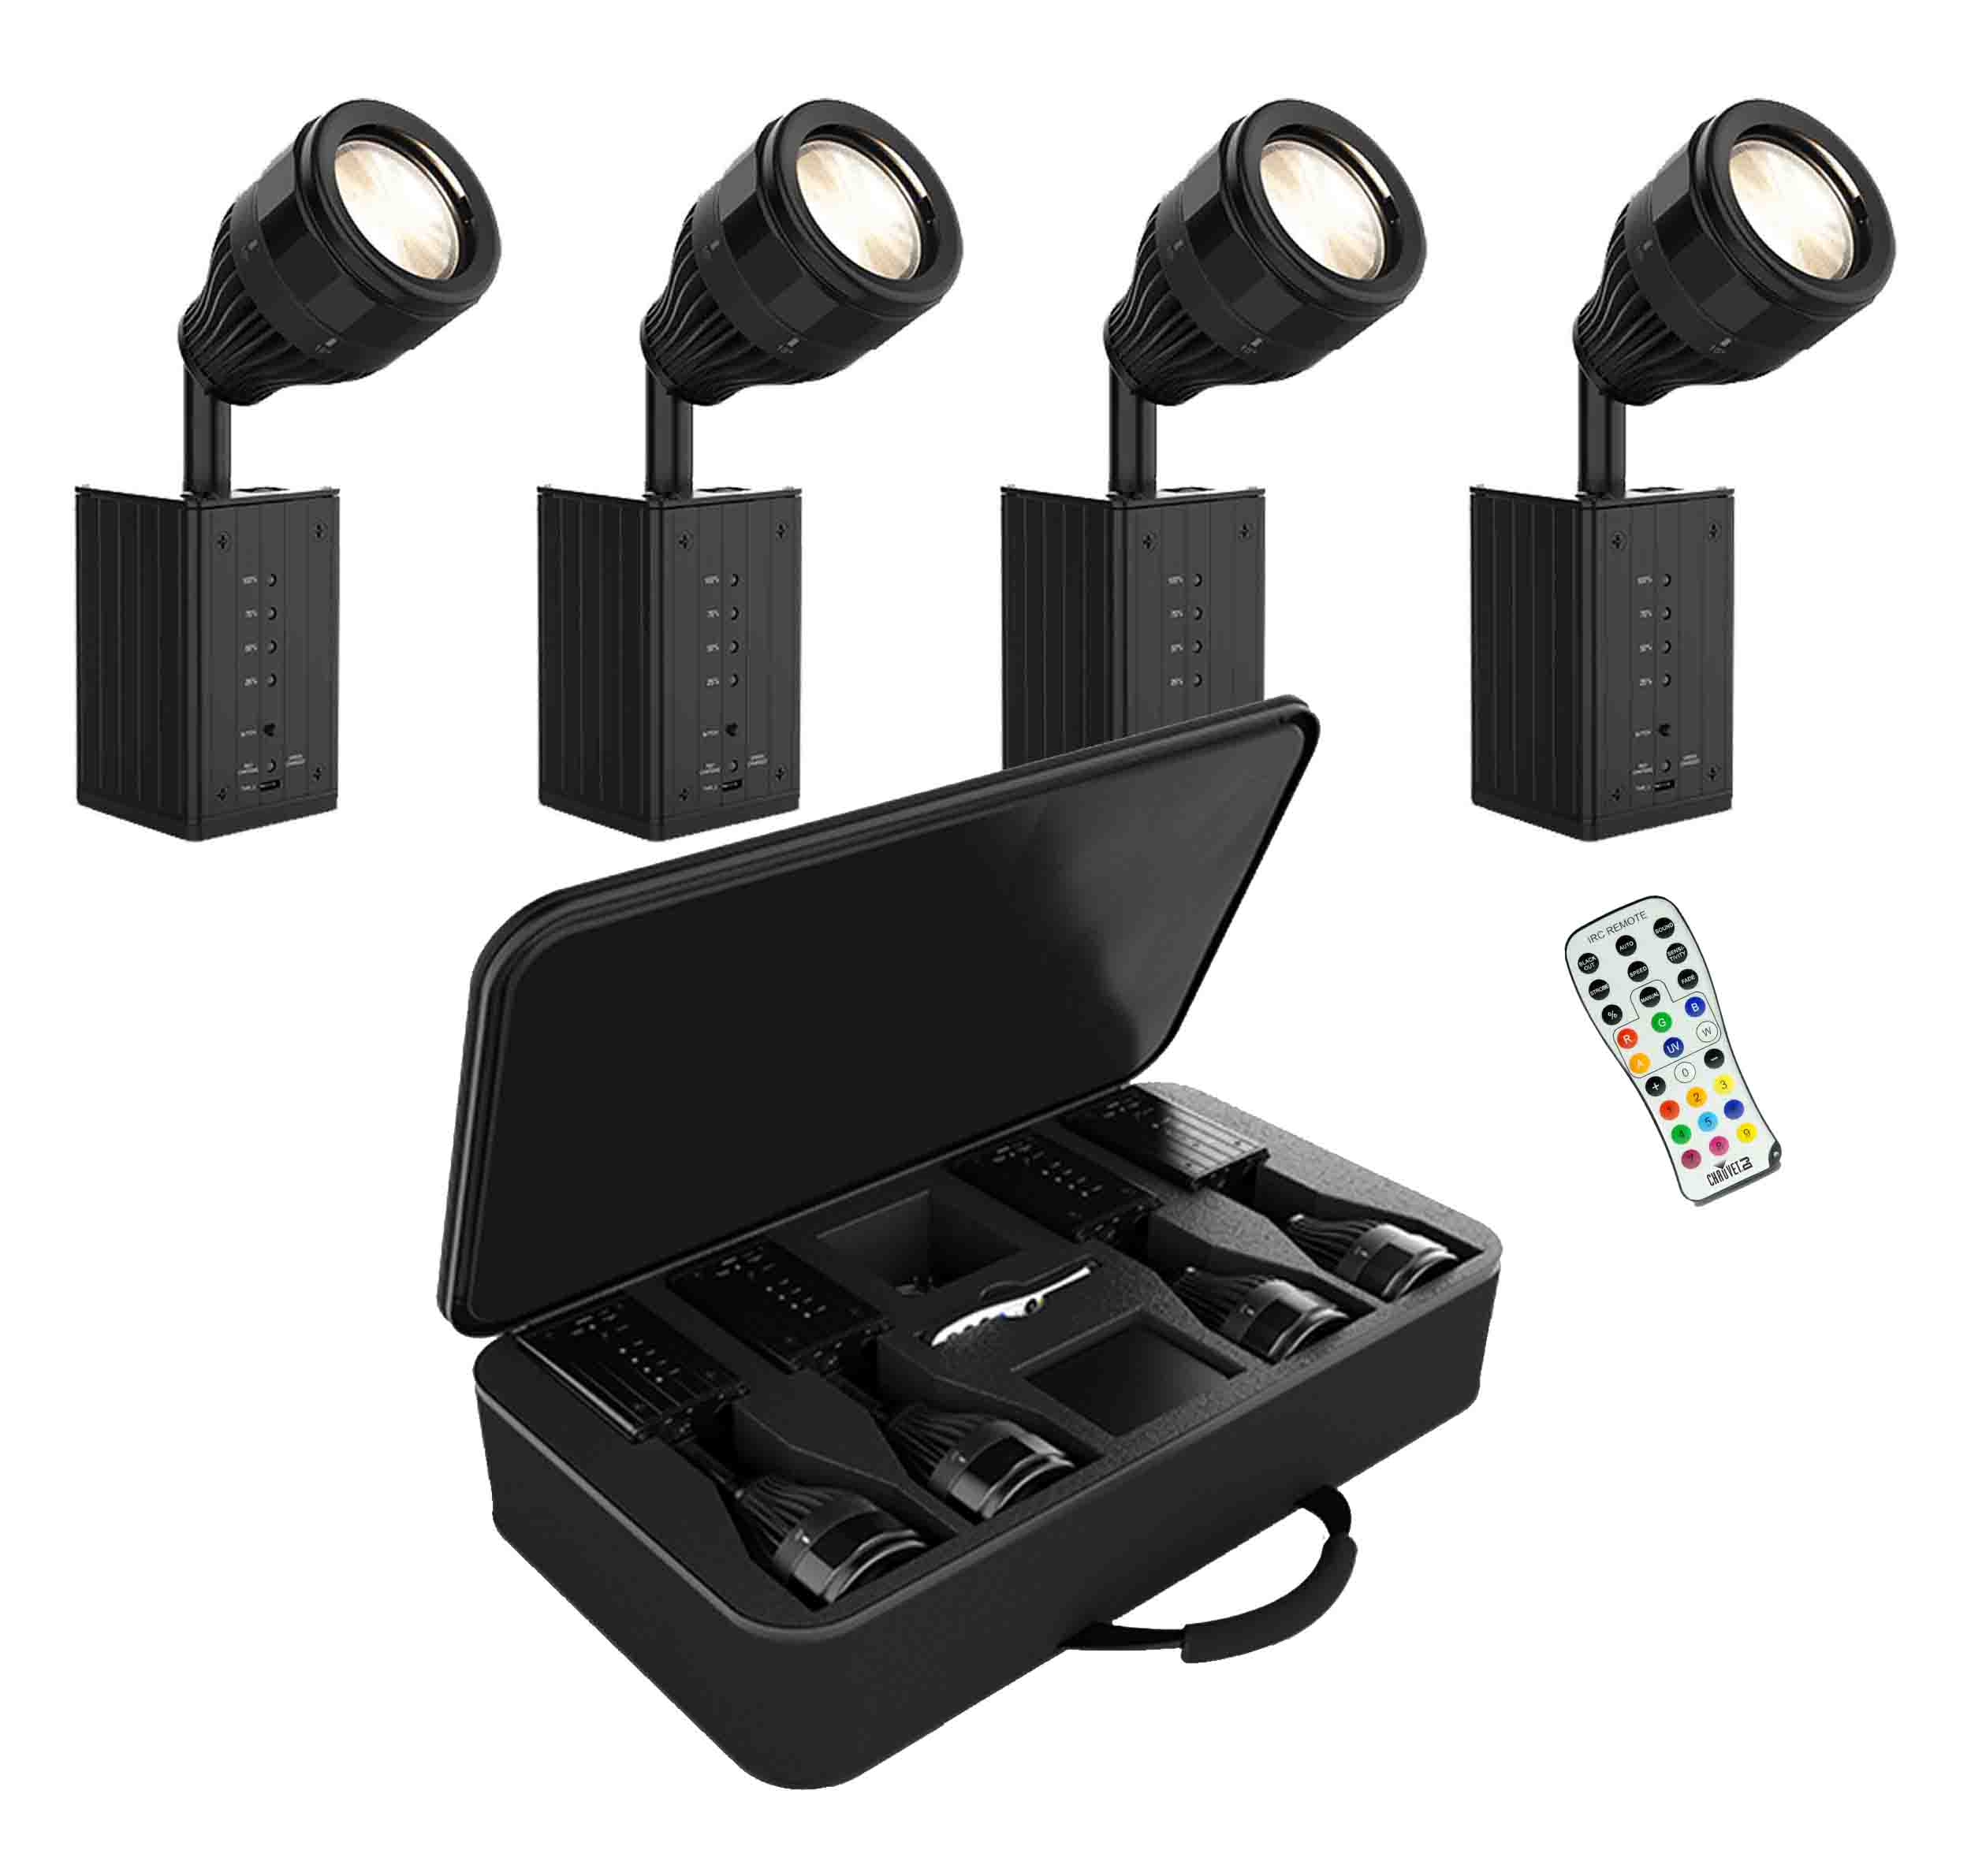 Chauvet DJ Ezpin Zoom Pack, Pin Spotting System Includes 4 EZpin Zoom Fixtures, 1 IRC-6 Remote and a Carry Bag Chauvet DJ